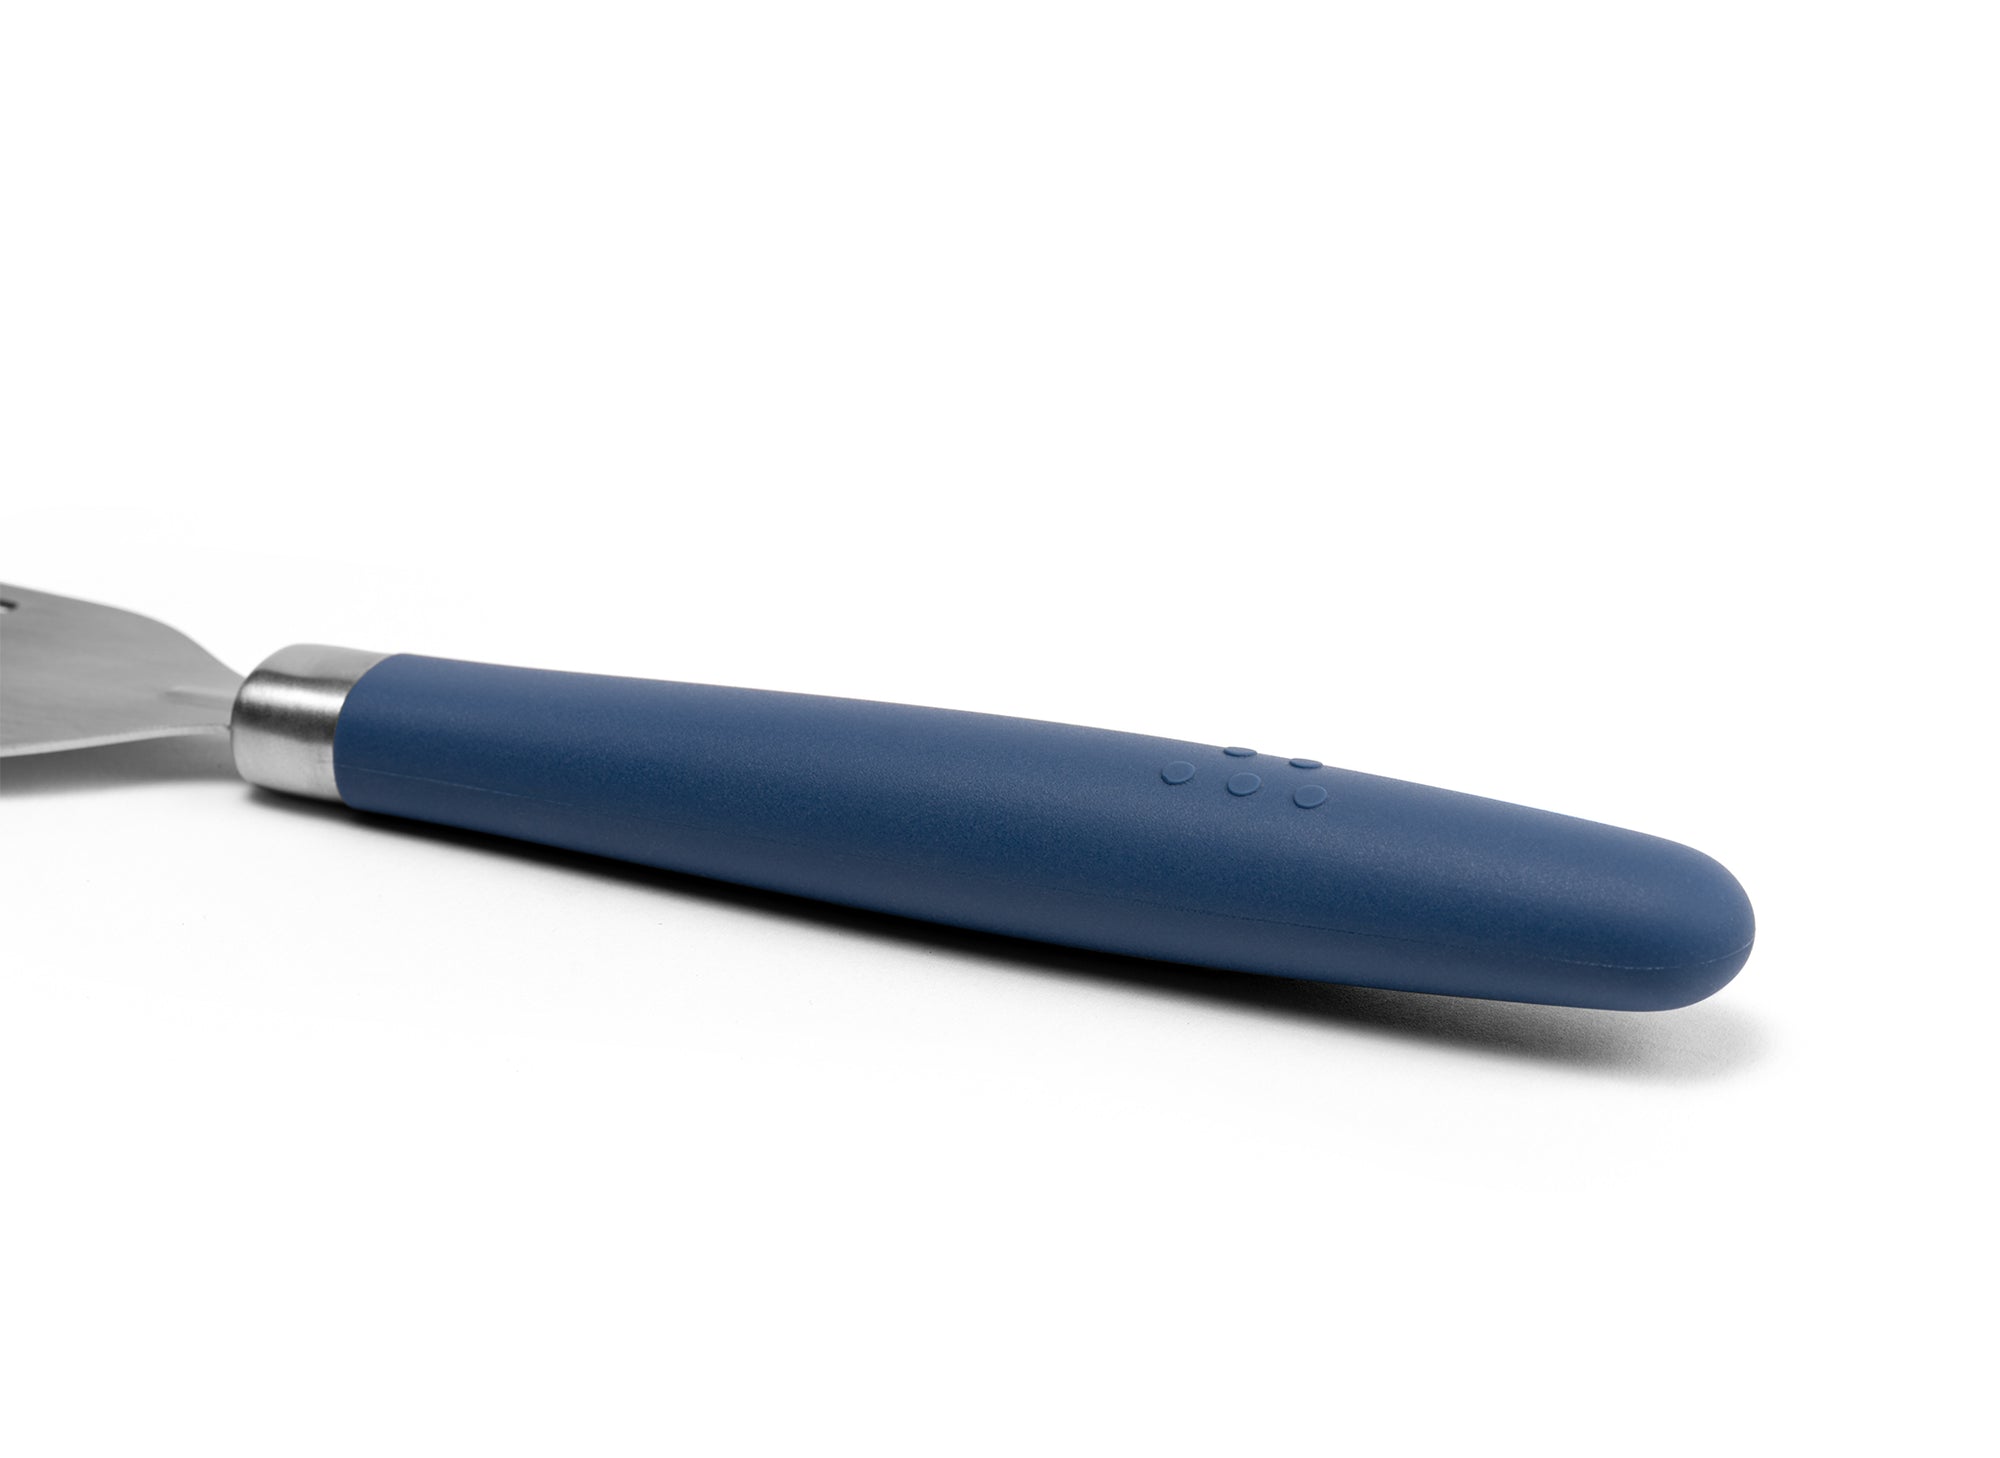 A close view of the Blue Misen Metal Fish Spatula’s slotted head. It’s long, slightly flared, and made of bare steel.